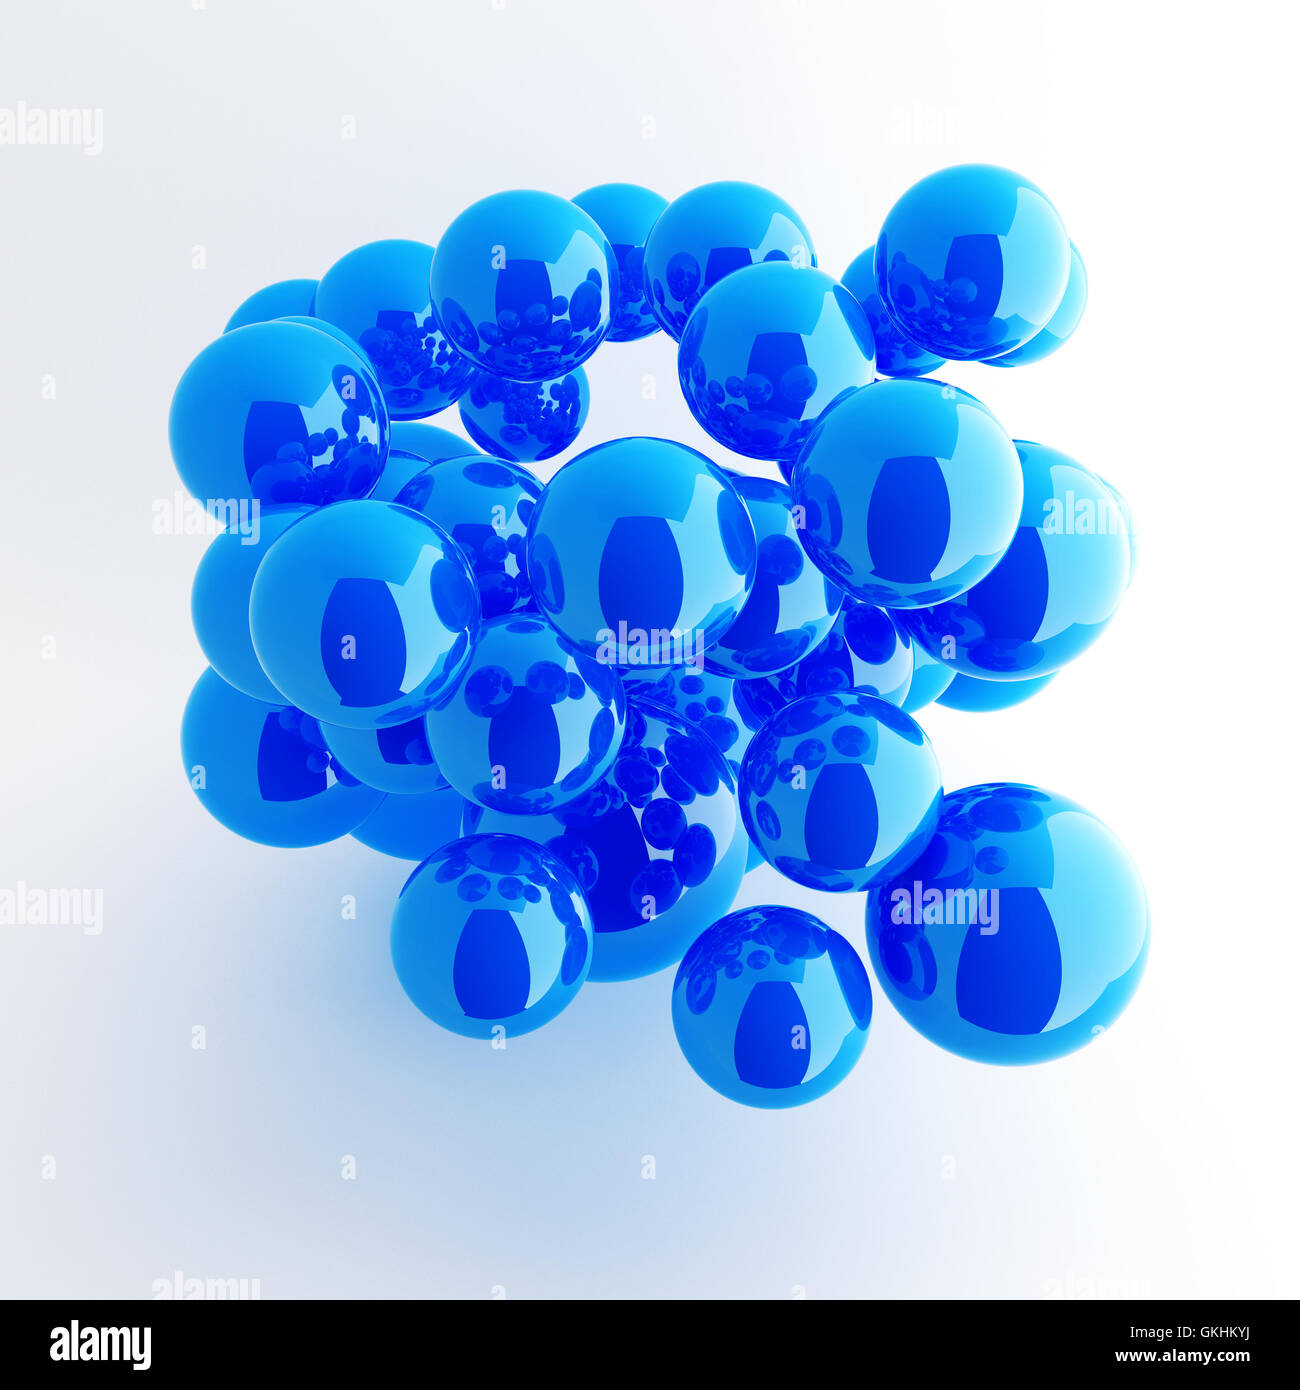 abstract background from bright blue shiny balls Stock Photo